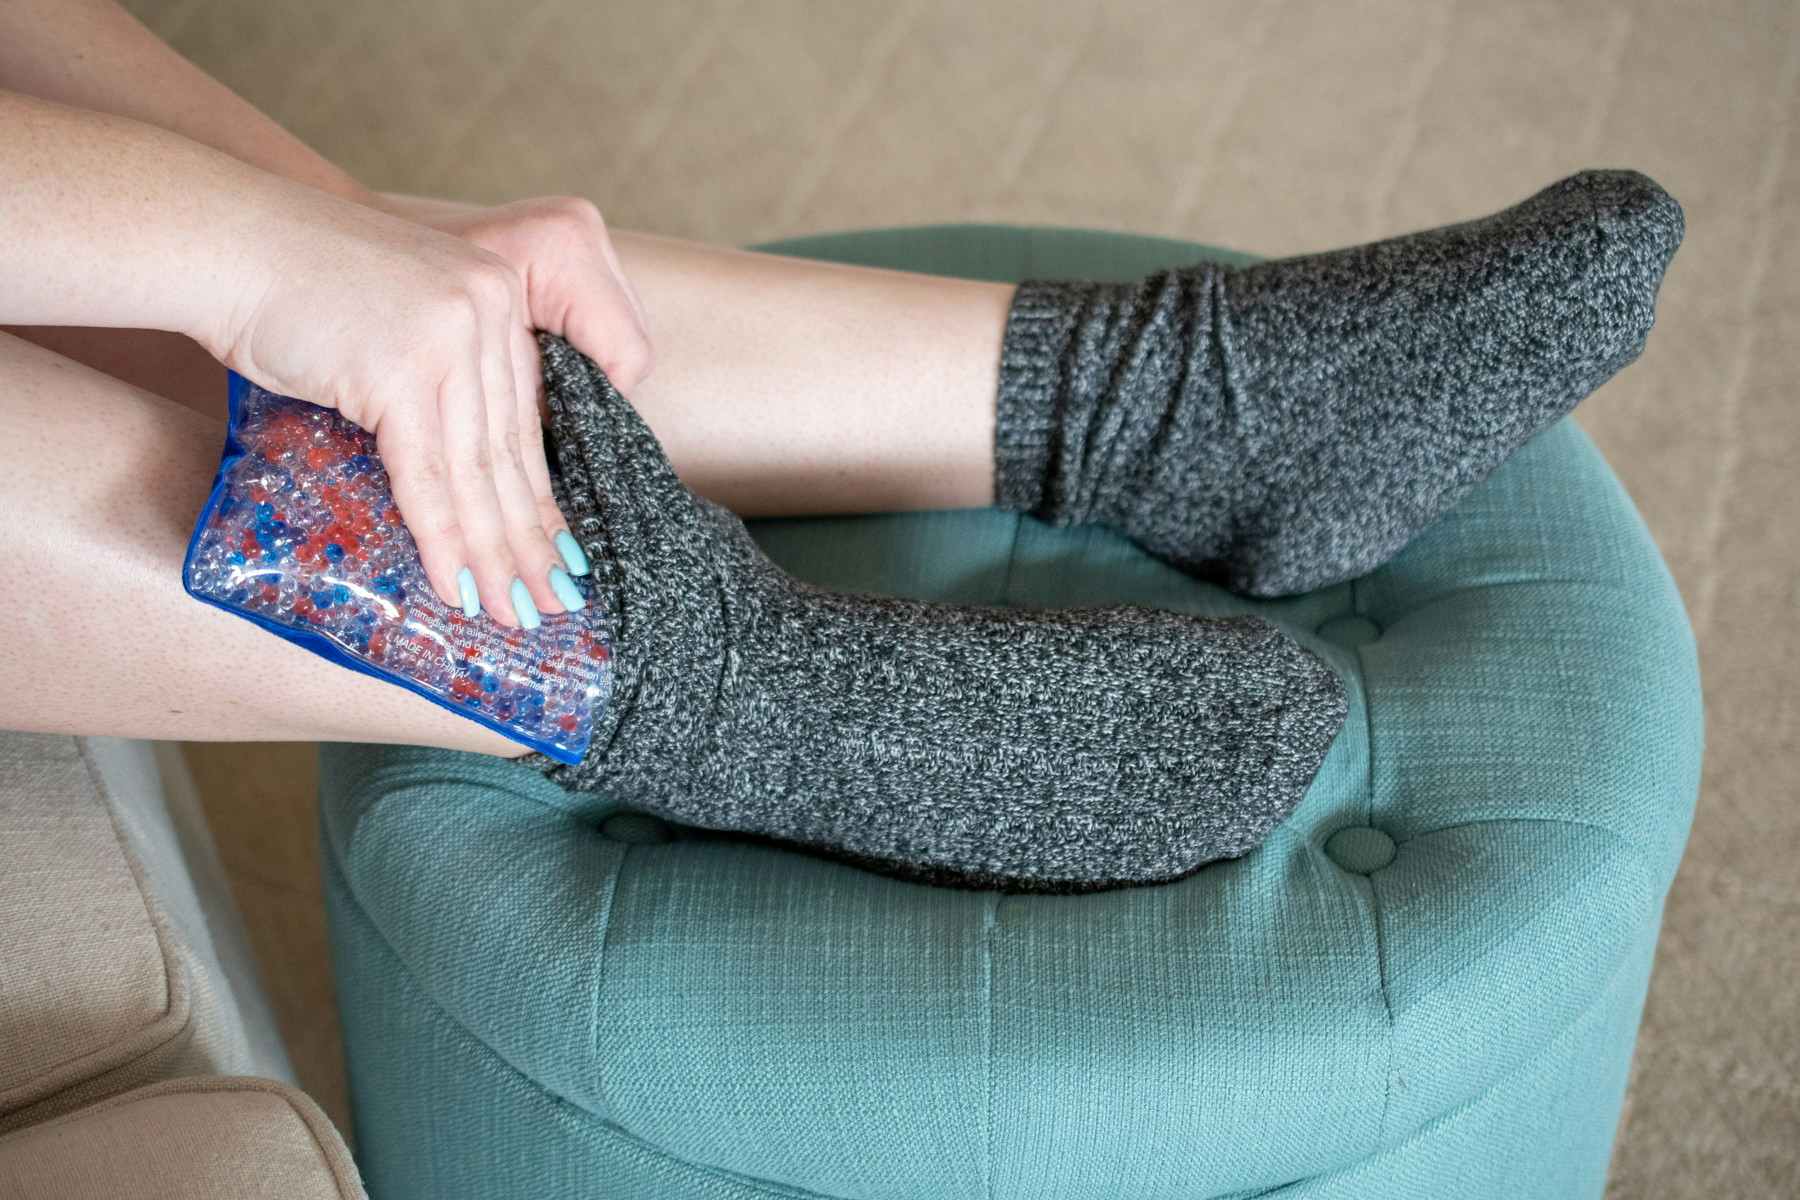 A person putting an ice gel pack under a sock on their foot.